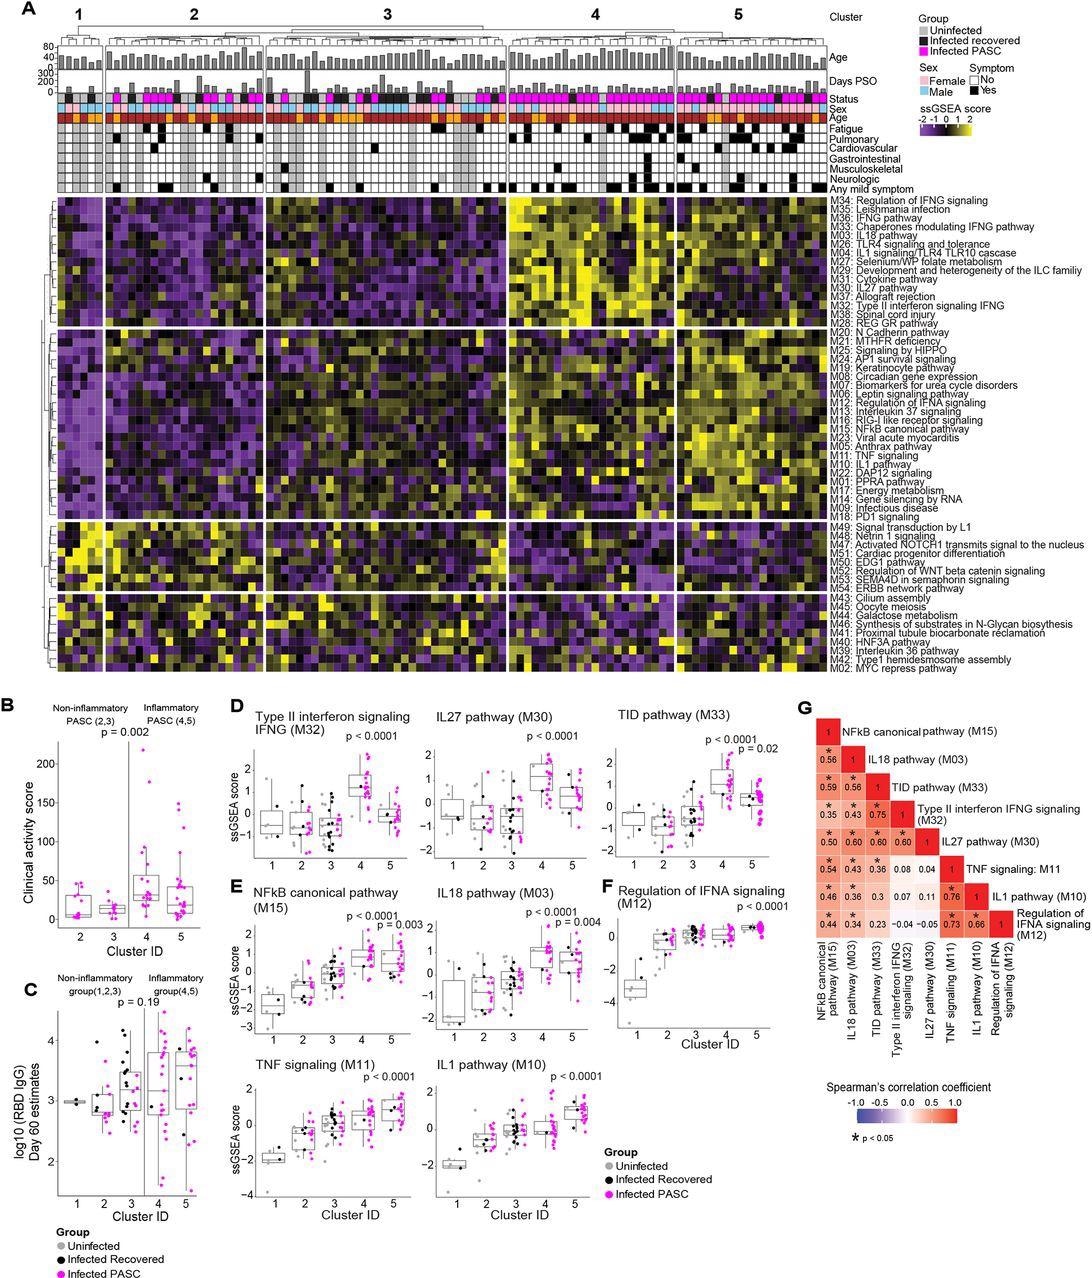 Serum proteomic clustering of PASC. (A) Heatmap of the rule-in method based unsupervised clustering of Olink serum proteome data across all patients in the cohort (PASC + recovered + uninfected). Rows represent modules, columns represent samples and the scaled ssGSEA module score across samples is depicted from low (purple) to high (yellow). The method identifies 2 clusters of subjects with higher inflammatory module signatures (4 & 5) relative to the other three clusters of subjects (1, 2, 3) that lack inflammatory signatures.